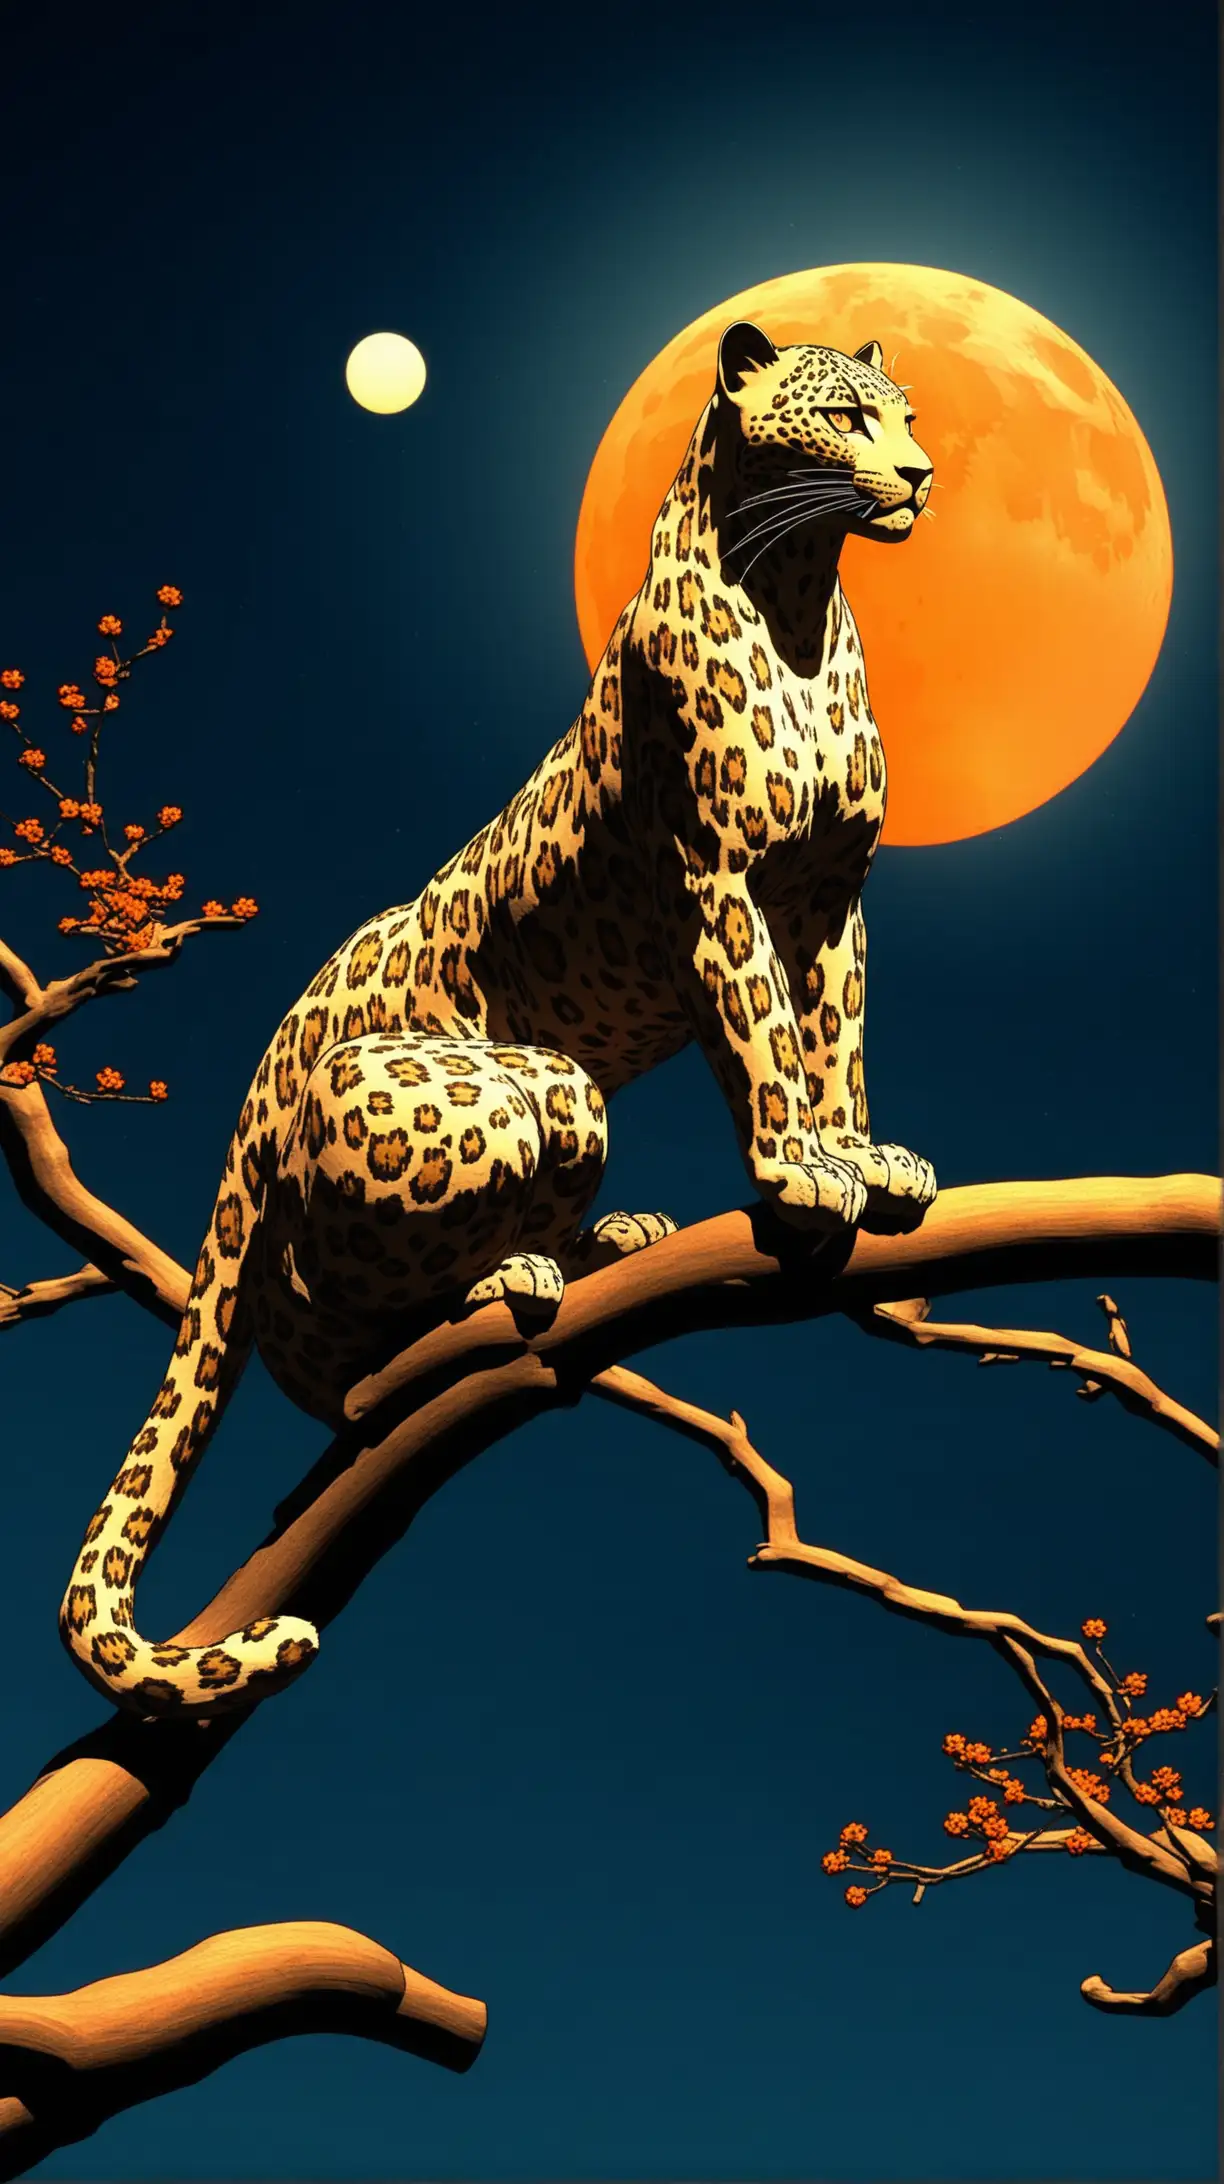 a leopard on a tree branch against an orange full moon and blue sky at night, Ukiyo-E 3D render style